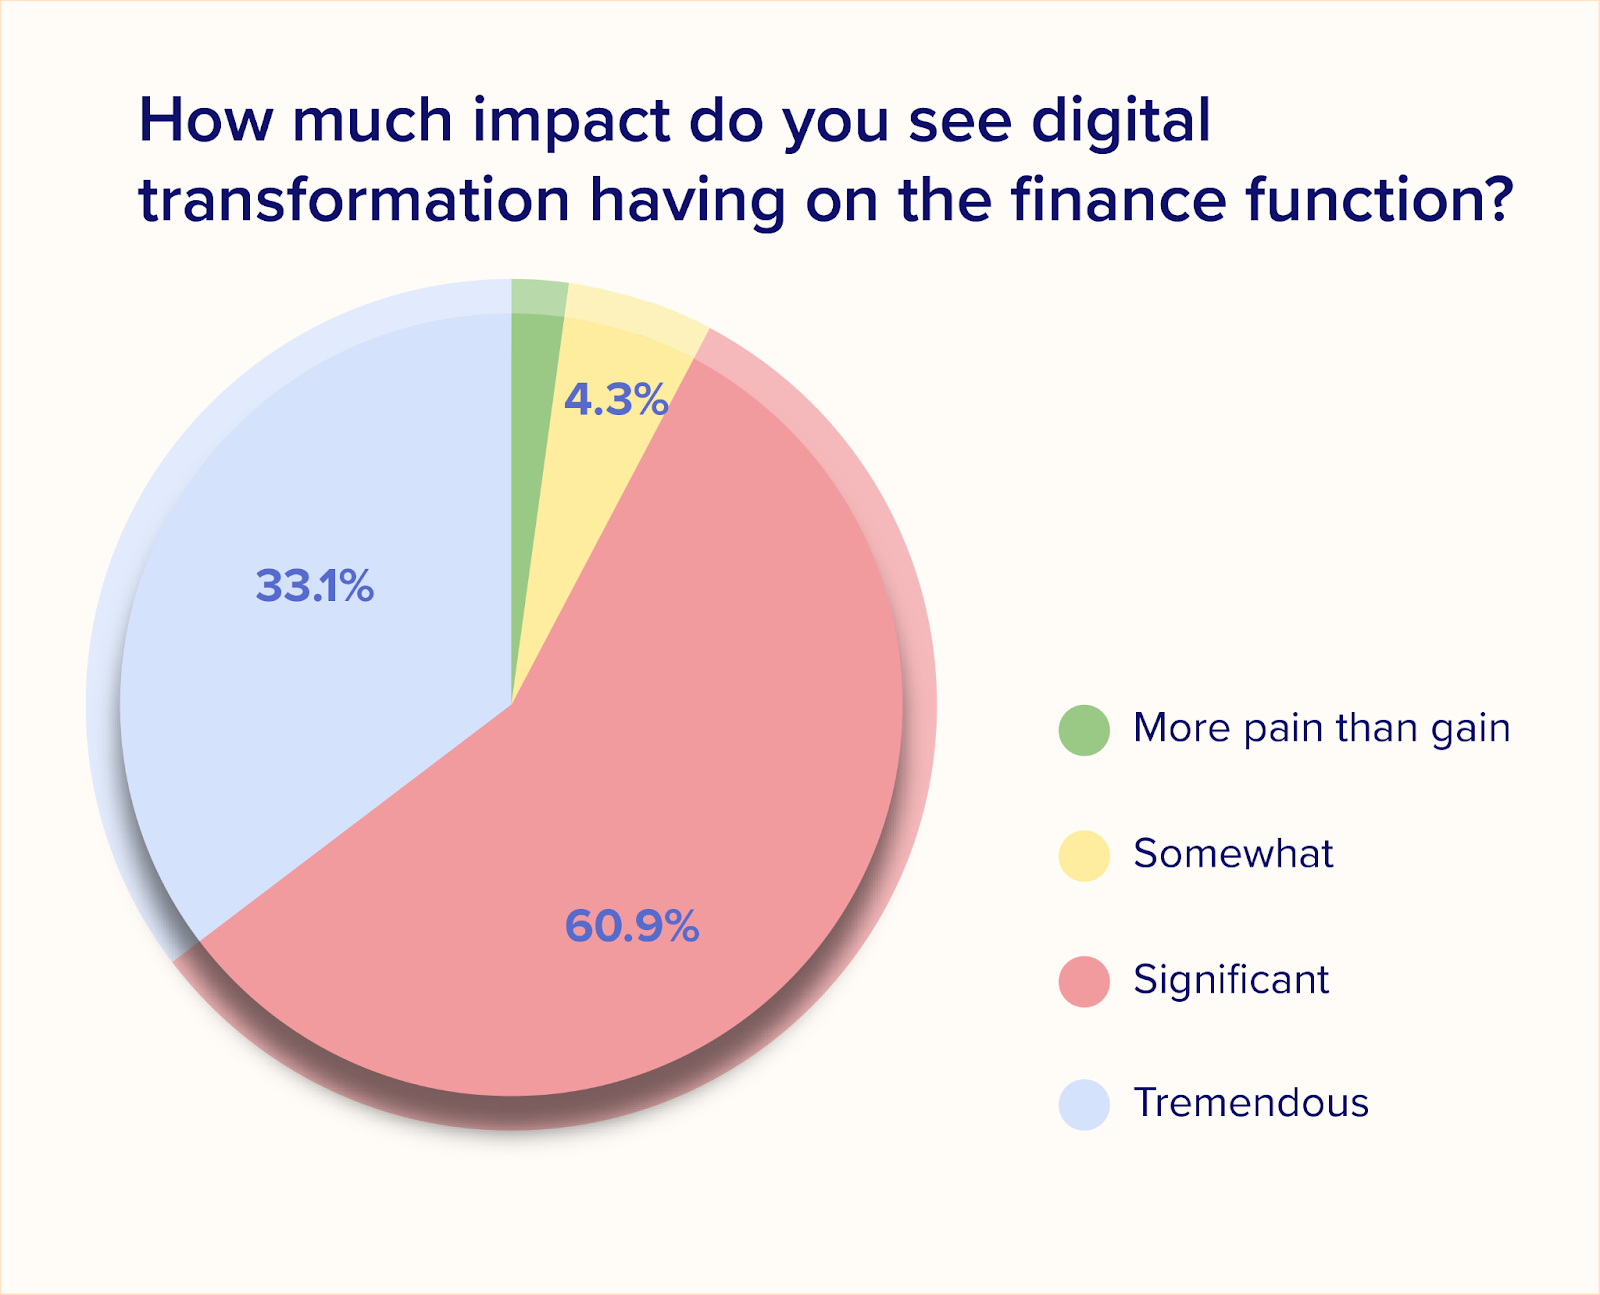 90% of finance leaders across India agree that digital transformation impacts finance function. 